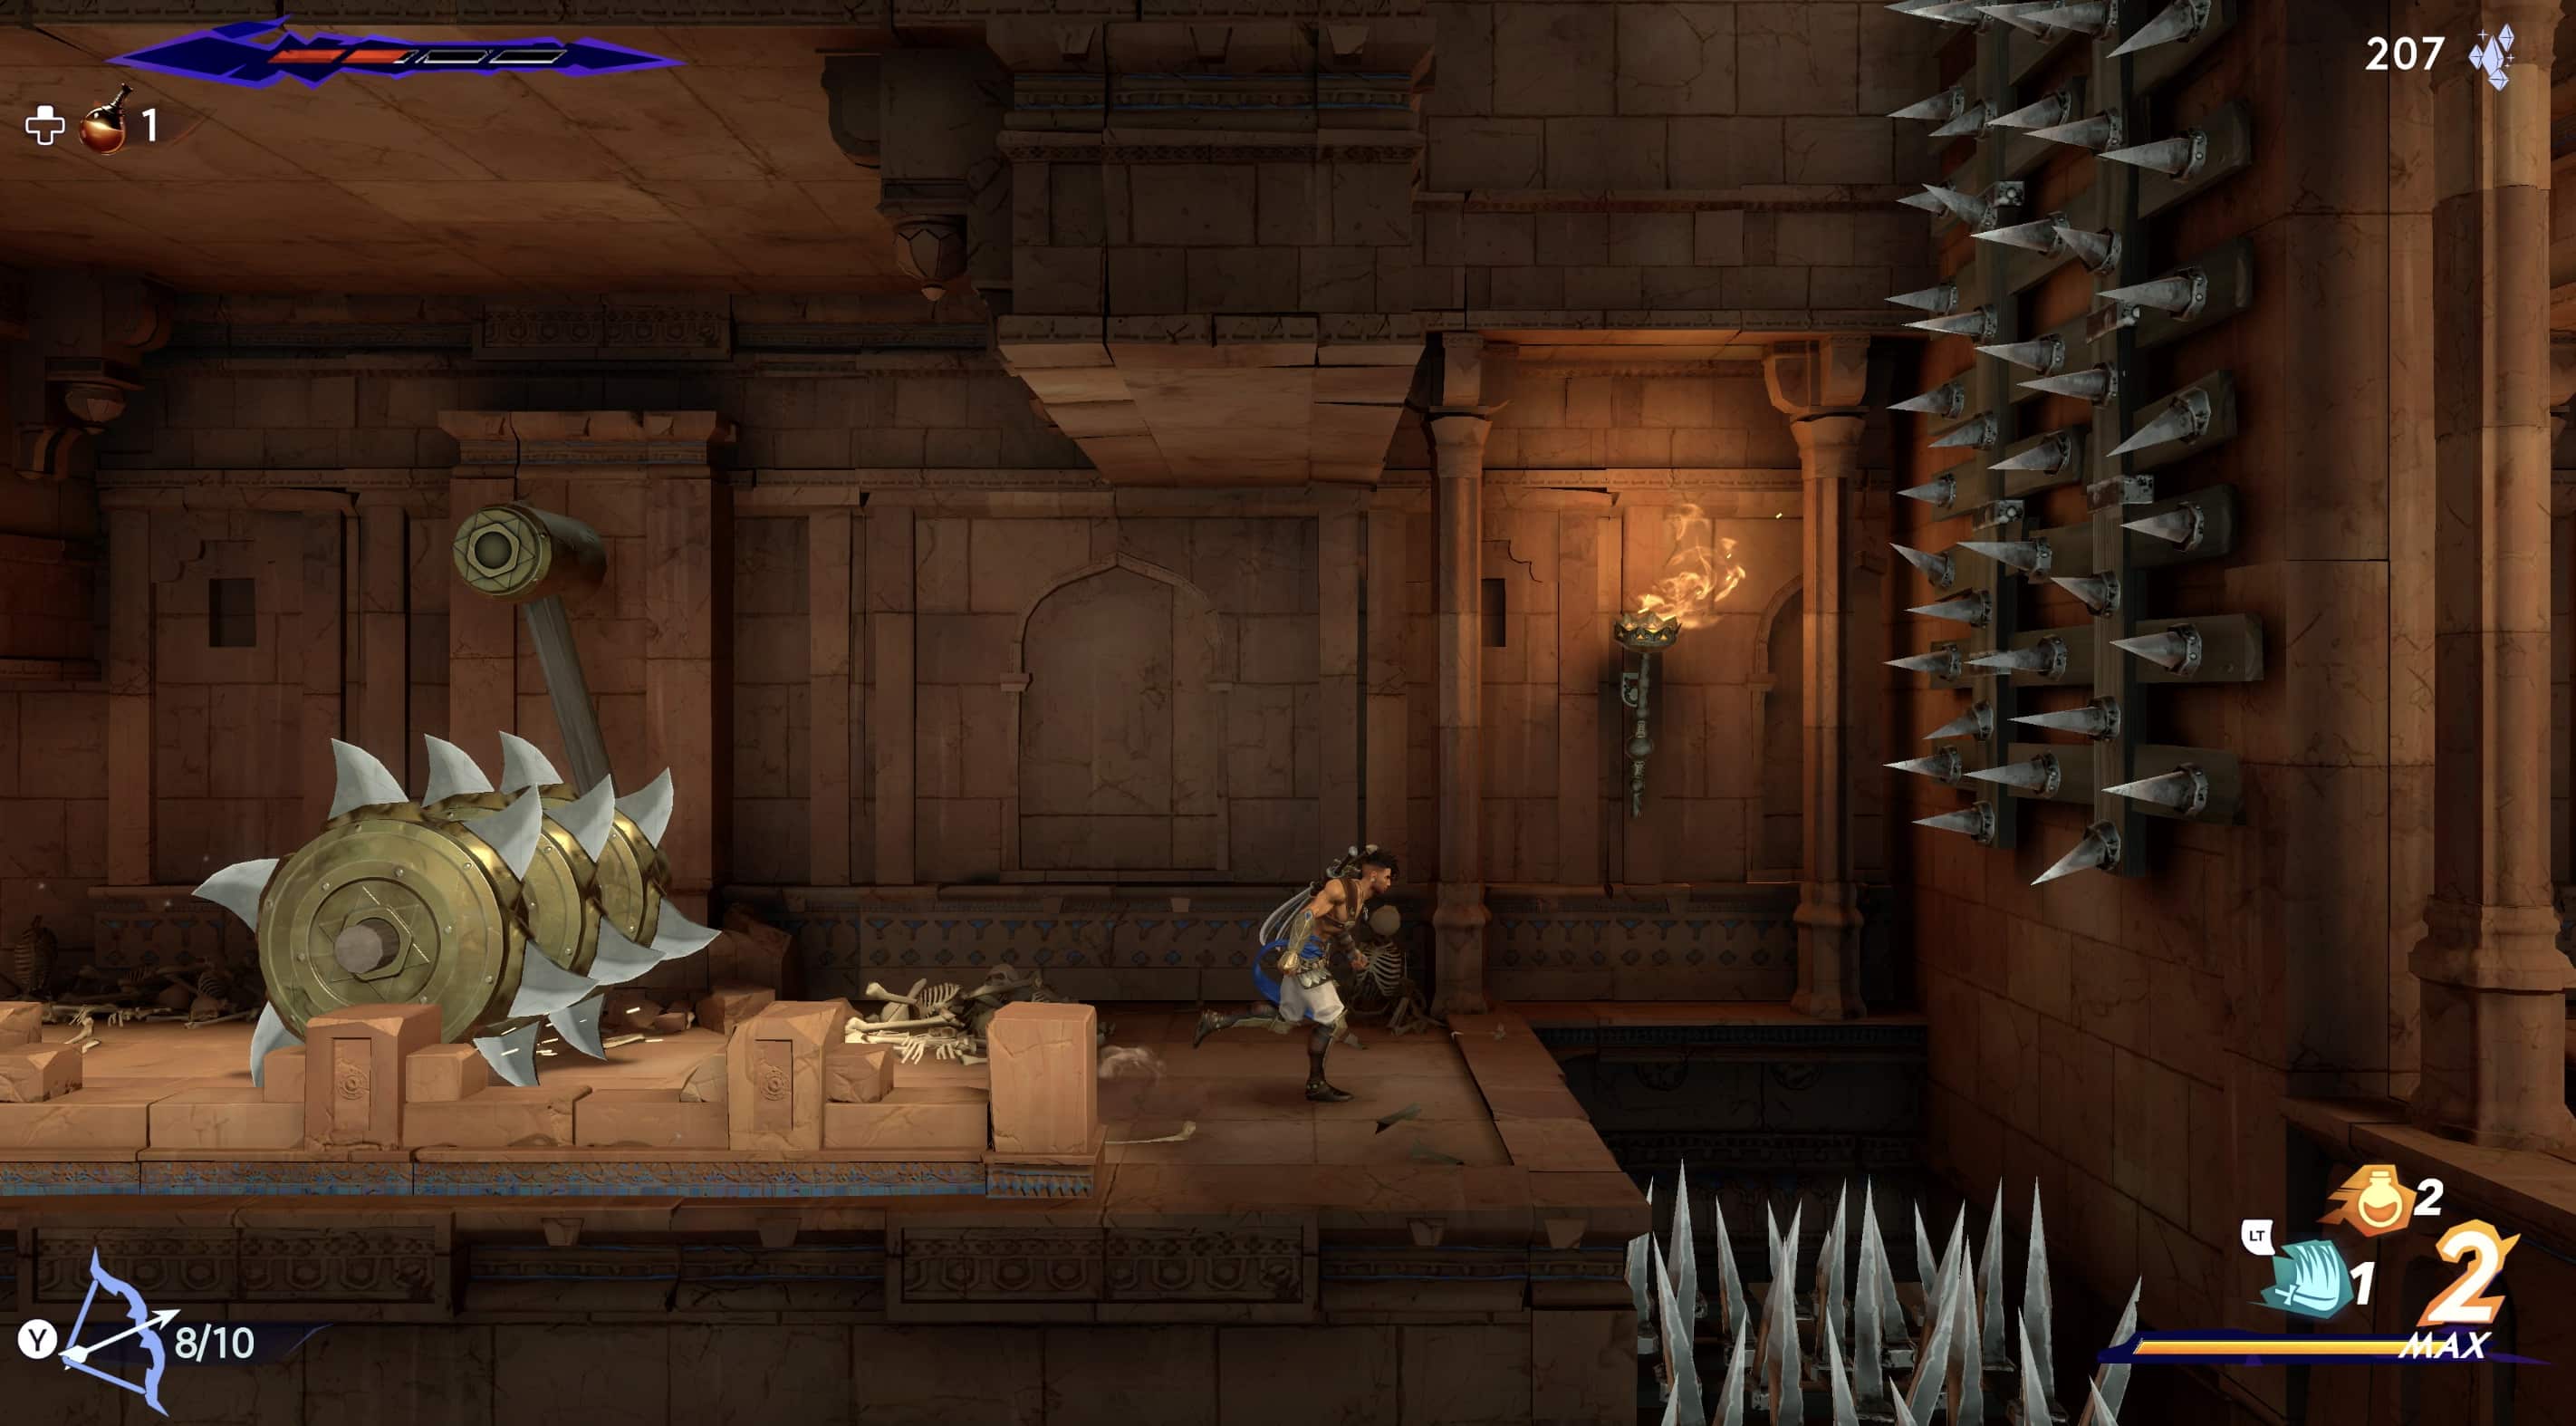 Prince of Persia: The Lost Crown has time powers and a semi open-world